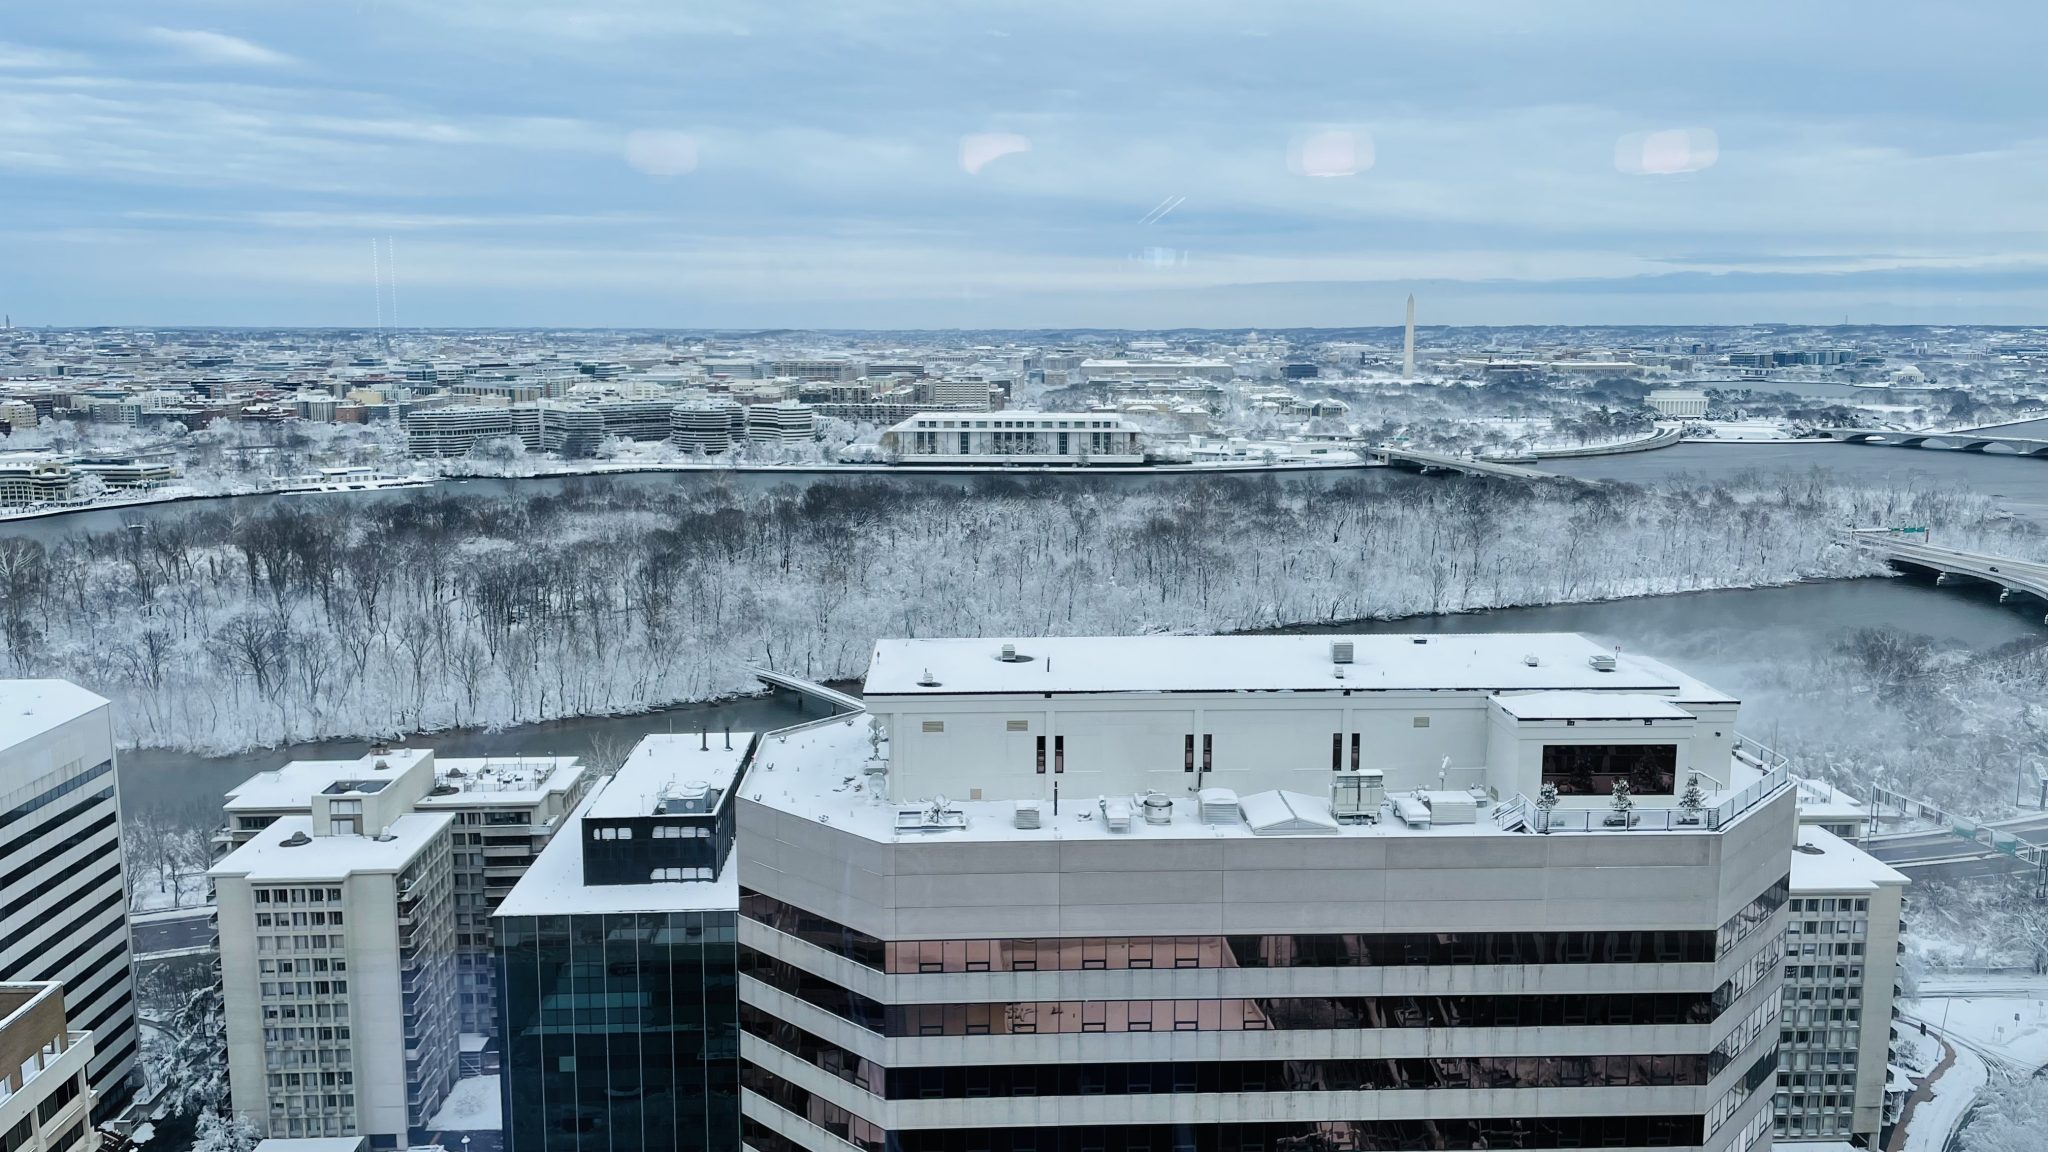 View of Washington DC from Virginia during snow winter